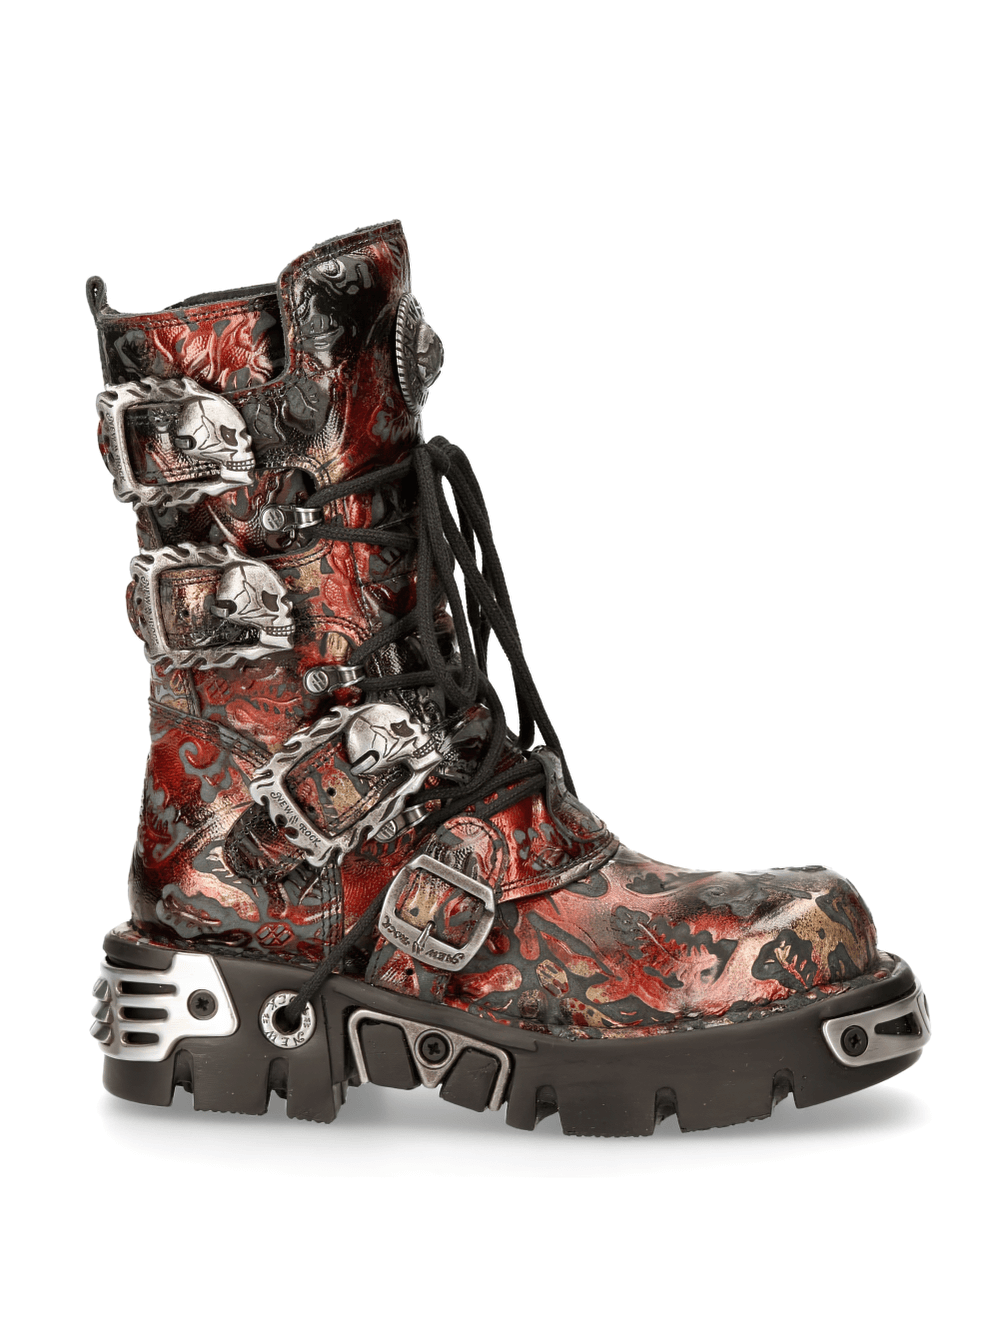 NEW ROCK Gothic Metallic Red Buckle Boots Unisex